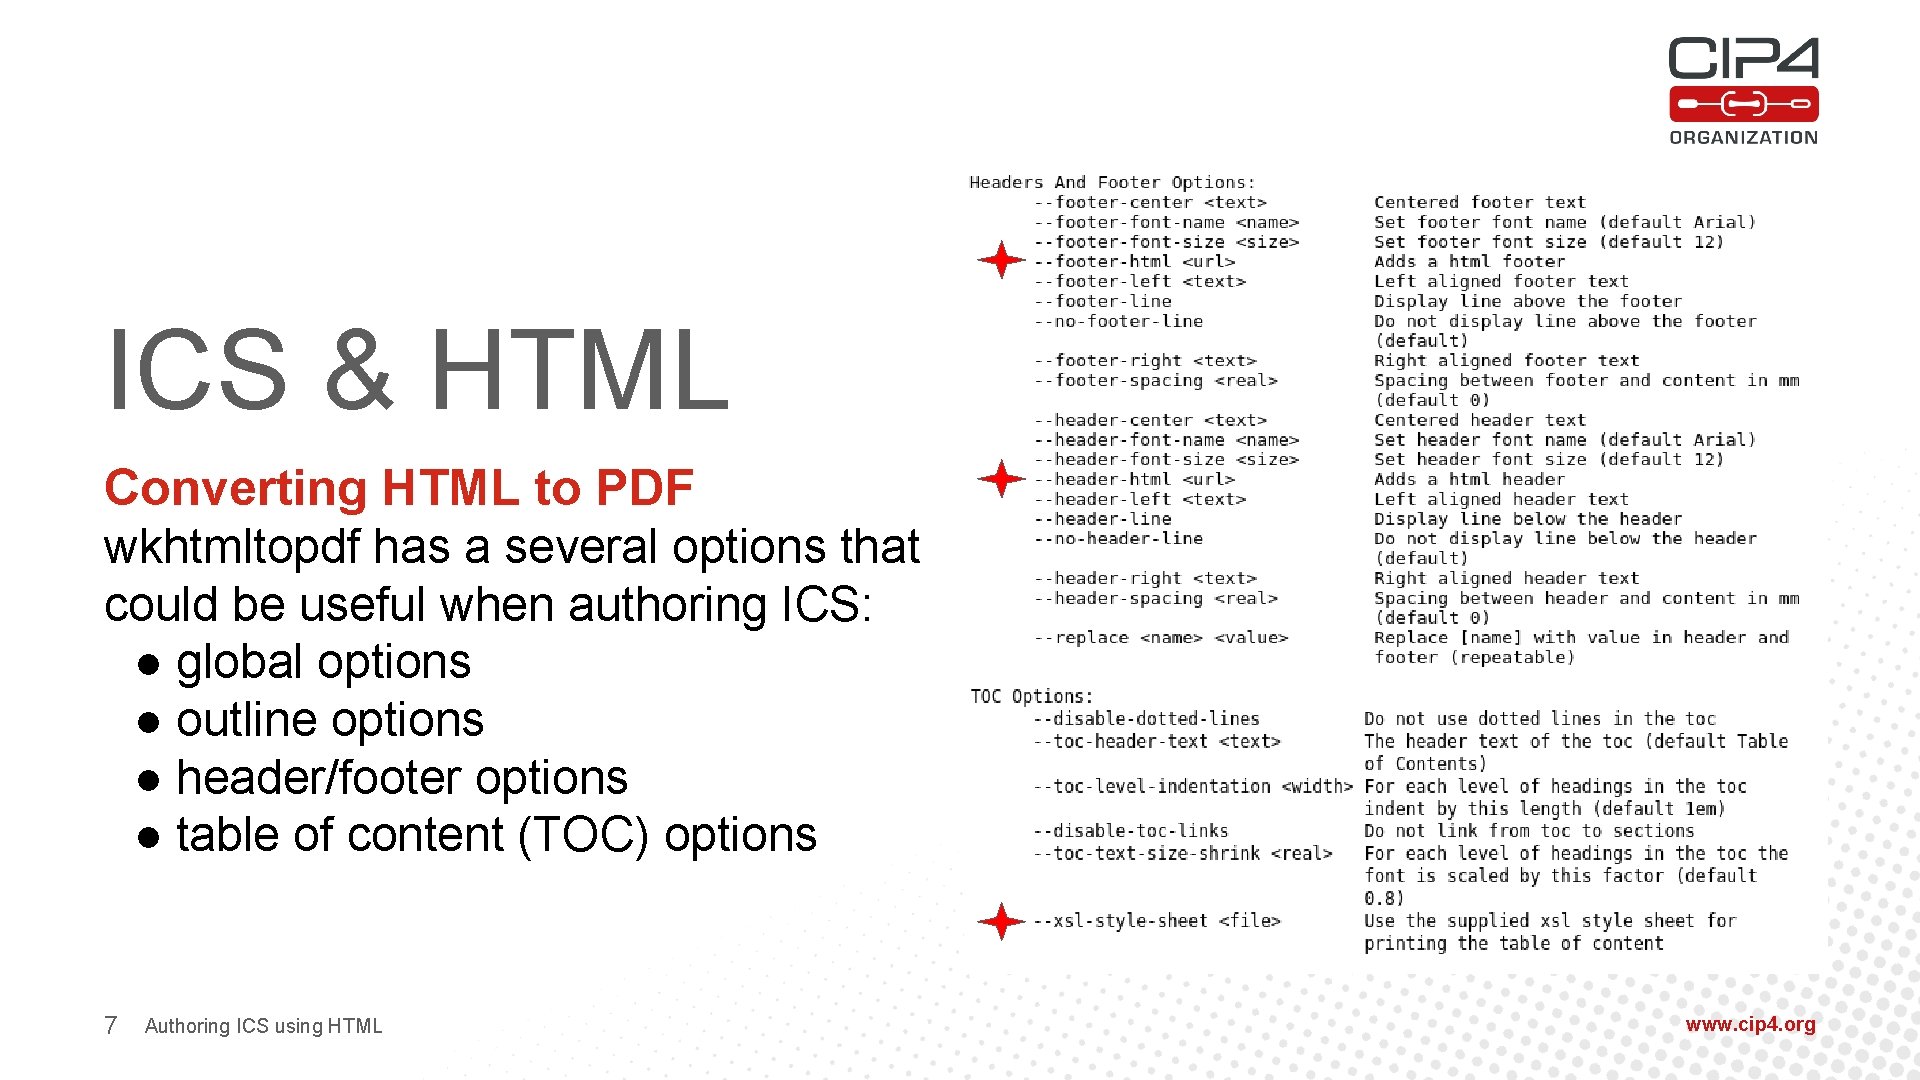 ICS & HTML Converting HTML to PDF wkhtmltopdf has a several options that could